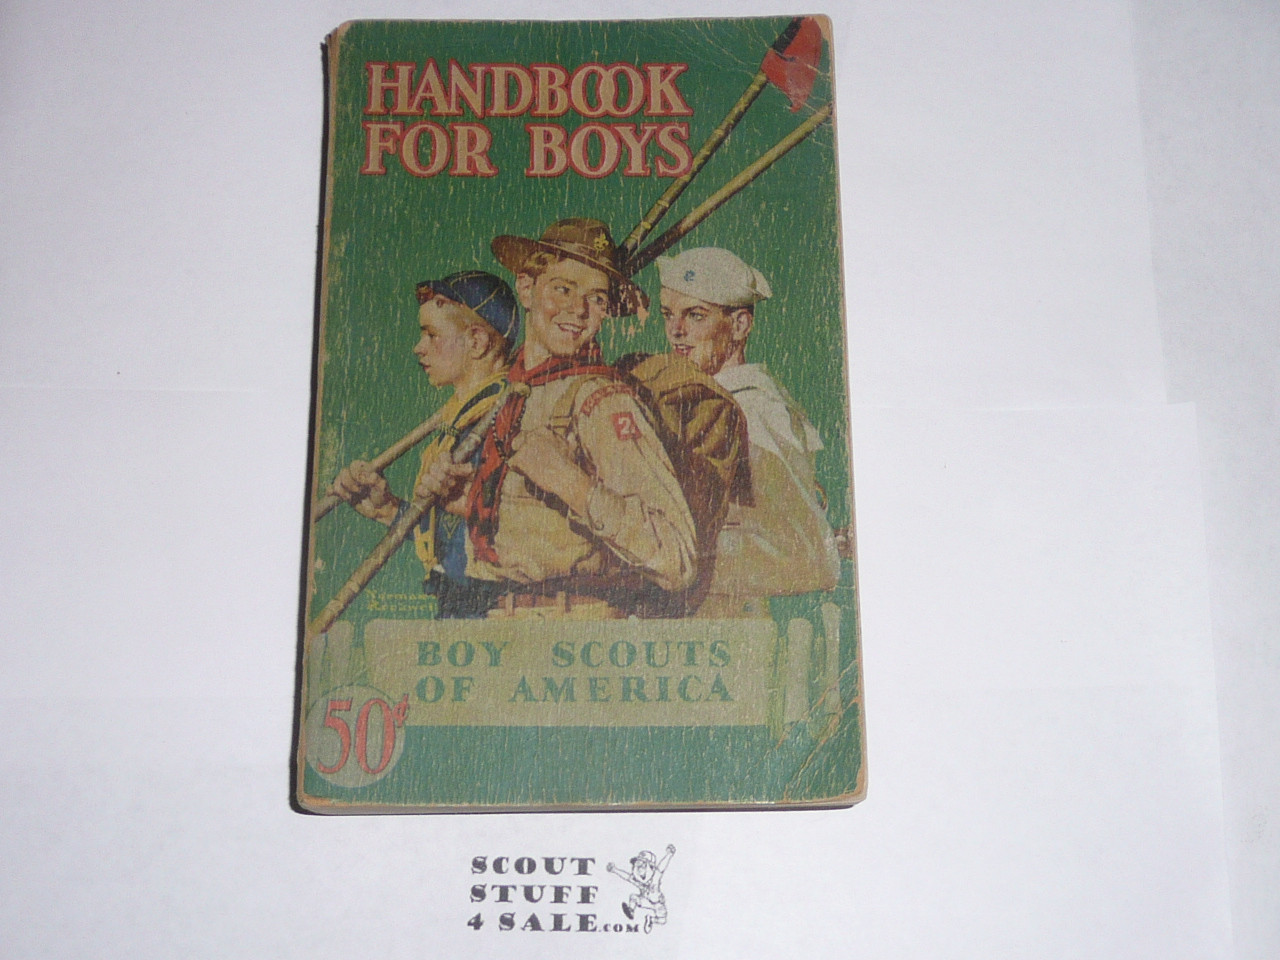 1942 Boy Scout Handbook, Fourth Edition, Thirty-fifth Printing, Norman Rockwell Cover, Litely used condition, distributed by American News Co.